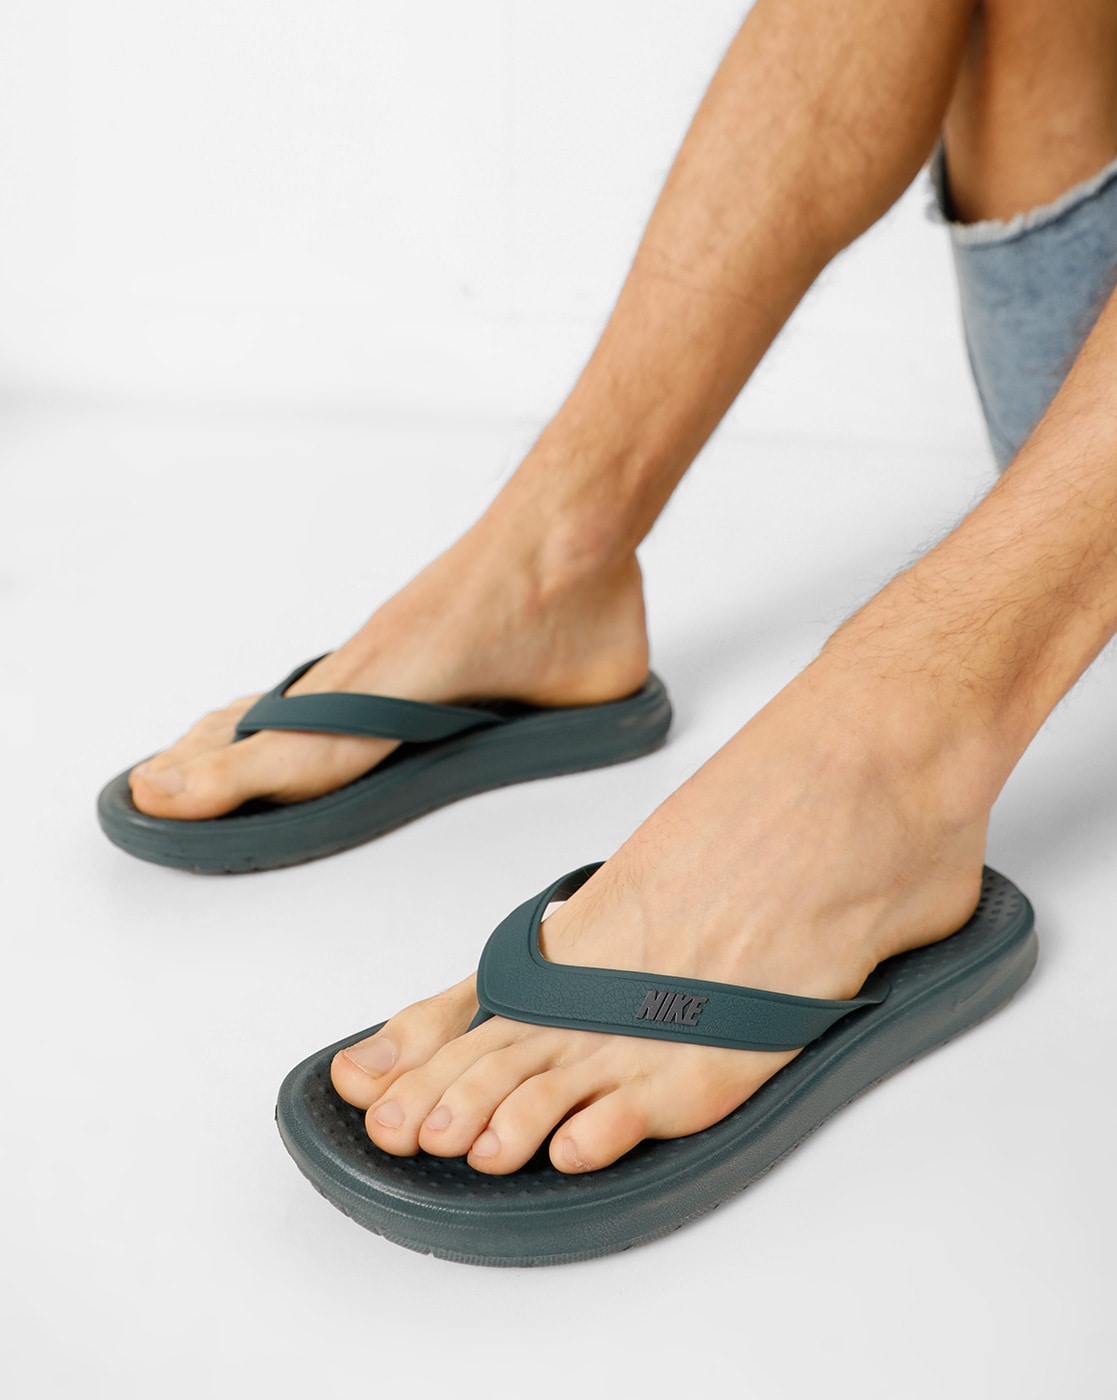 nike solay thong slippers